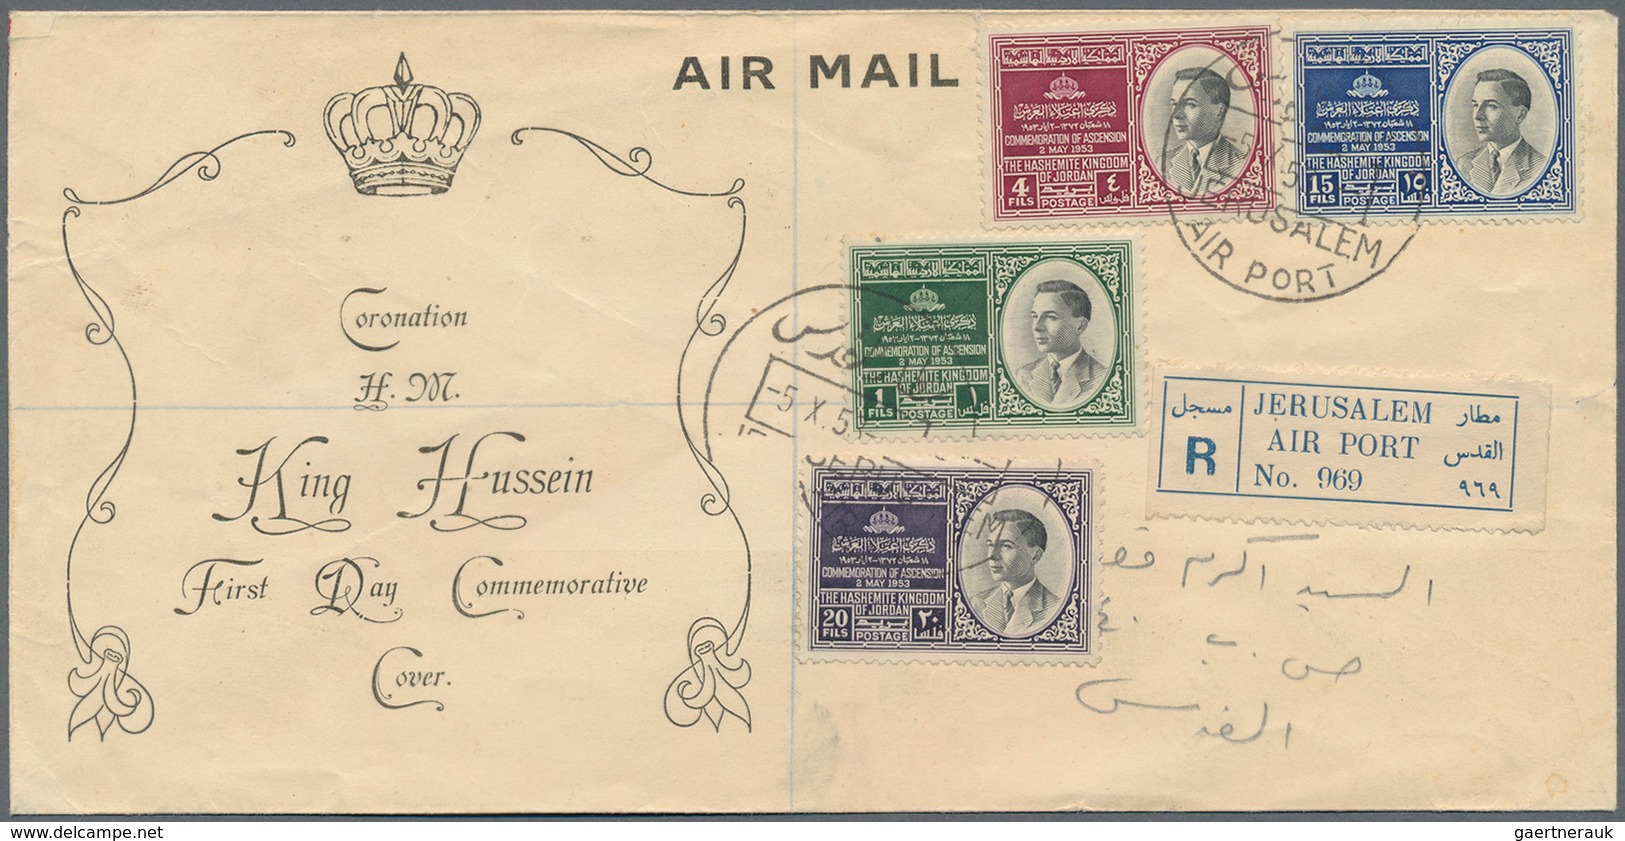 Jordanien: 1954/1989, holding of apprx. 200 covers/cards, mainly correspondence to Germany, showing